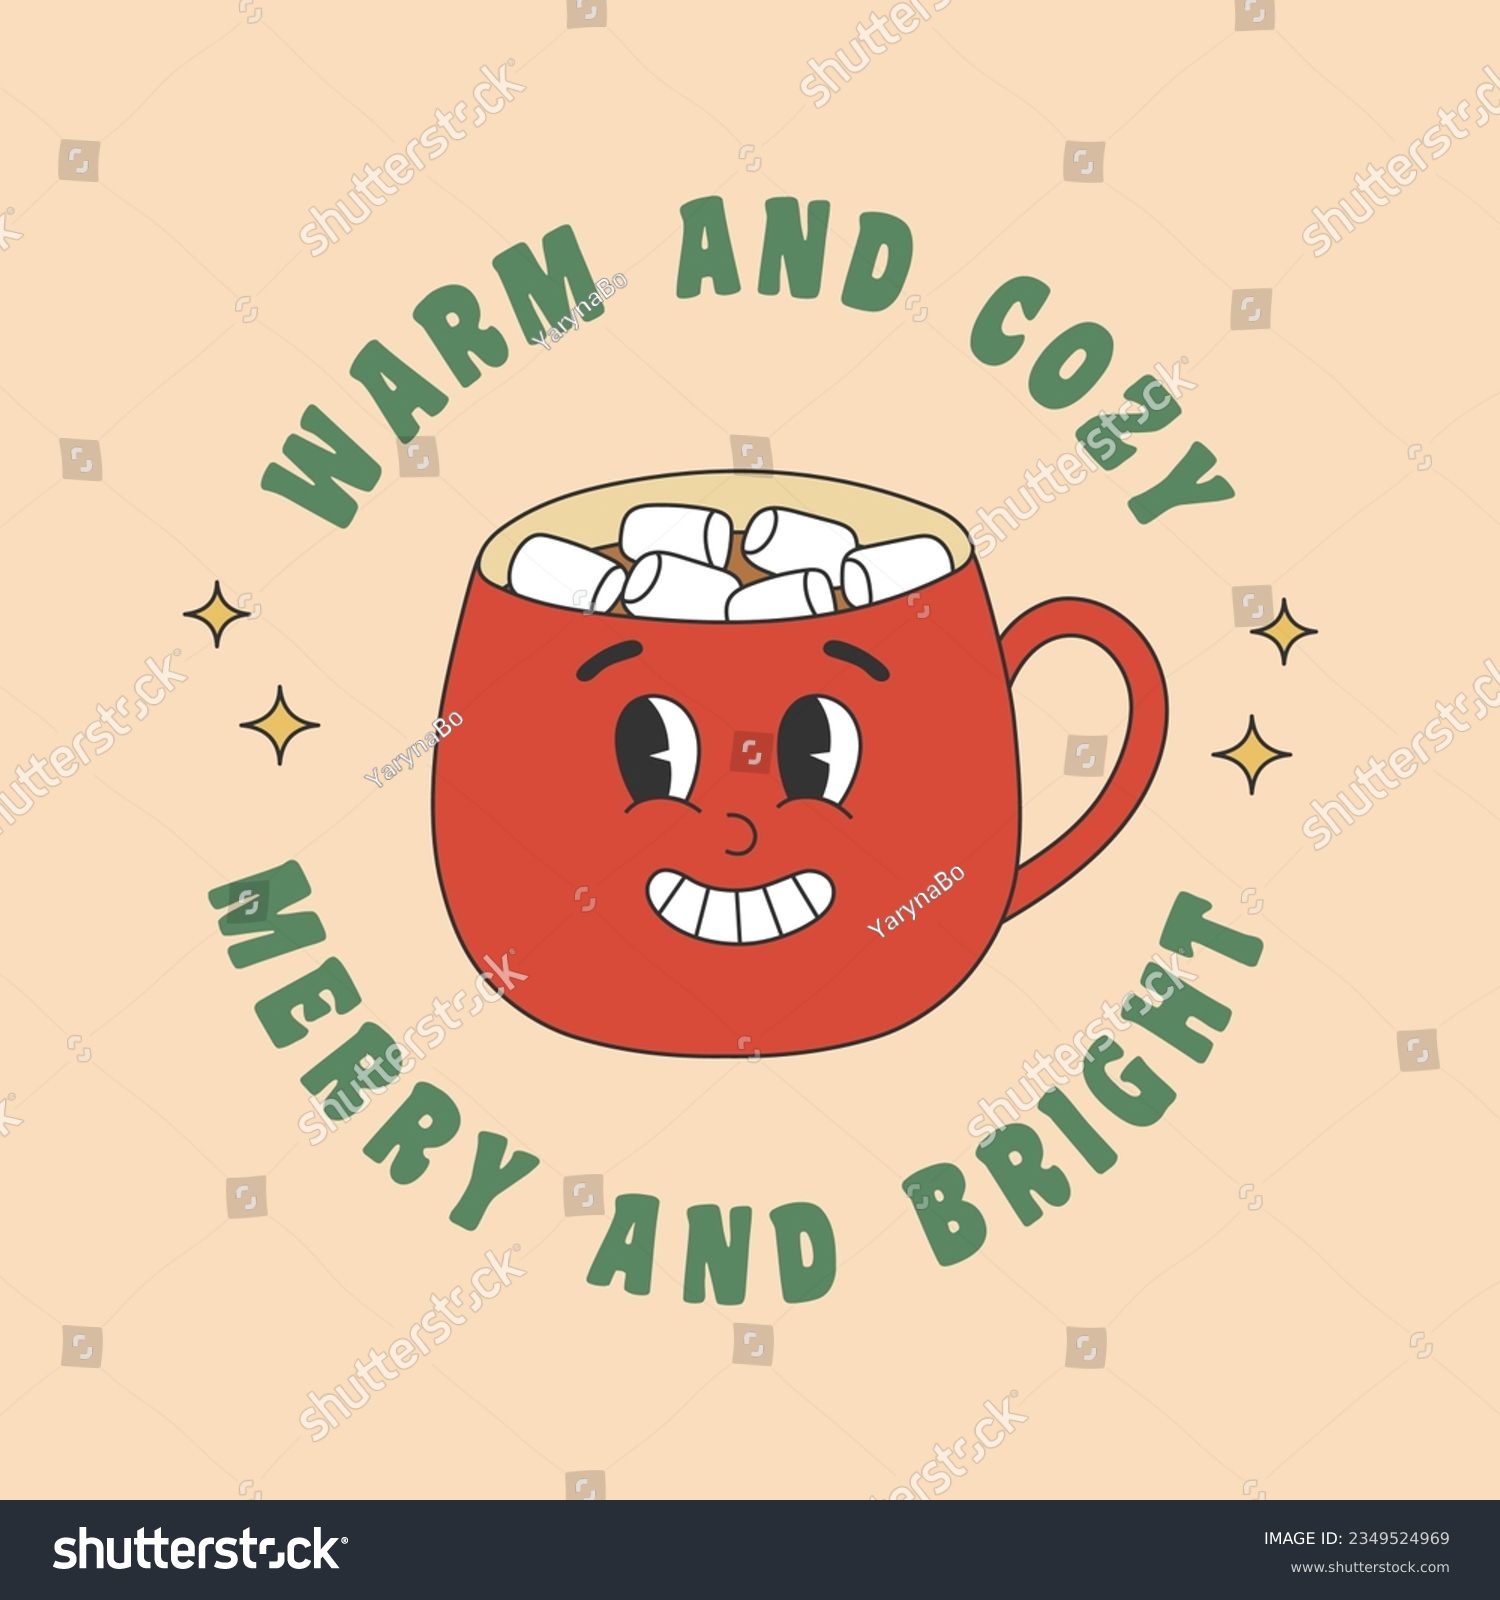 SVG of Christmas greeting card with red cup and marshmallow in groovy style. Template for Merry Christmas and Happy New year greeting card, poster, party invitation. Vector illustration svg